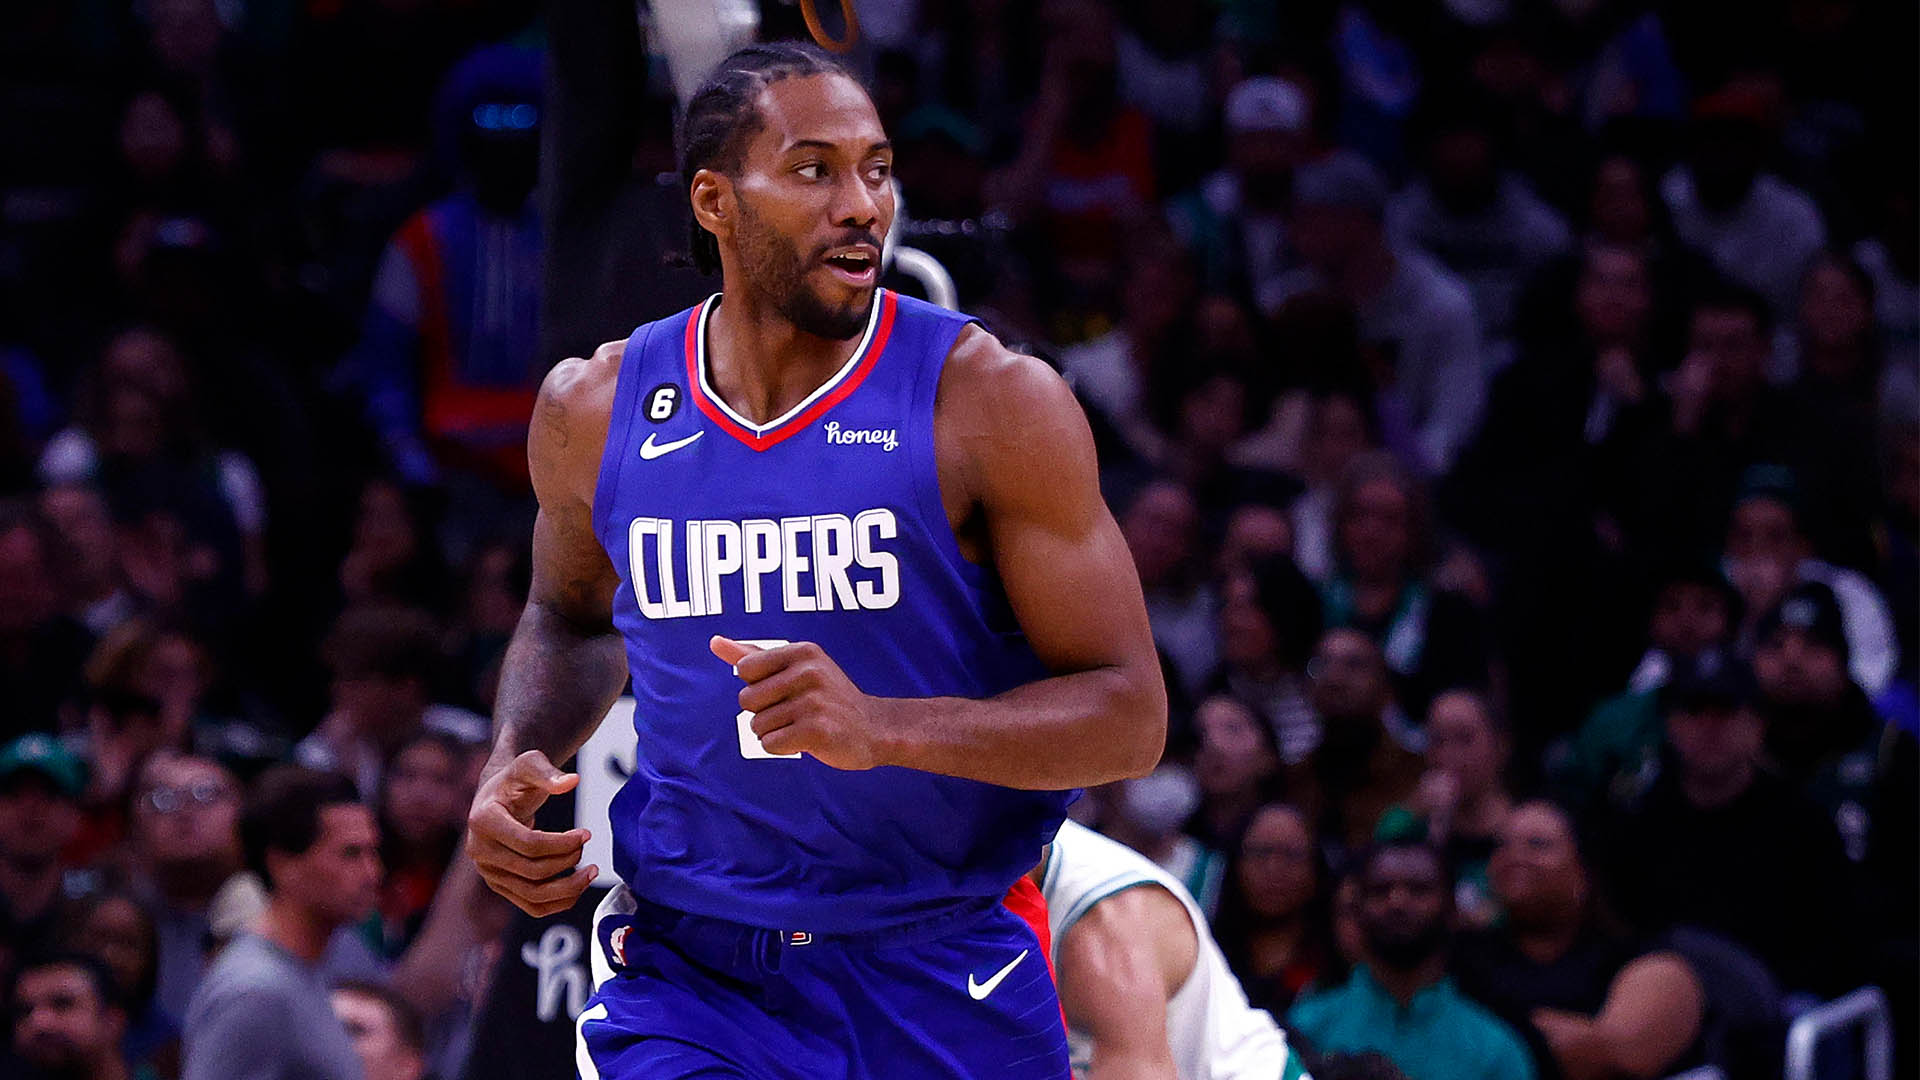 2022-23 Los Angeles Clippers season preview: Best team in L.A.?